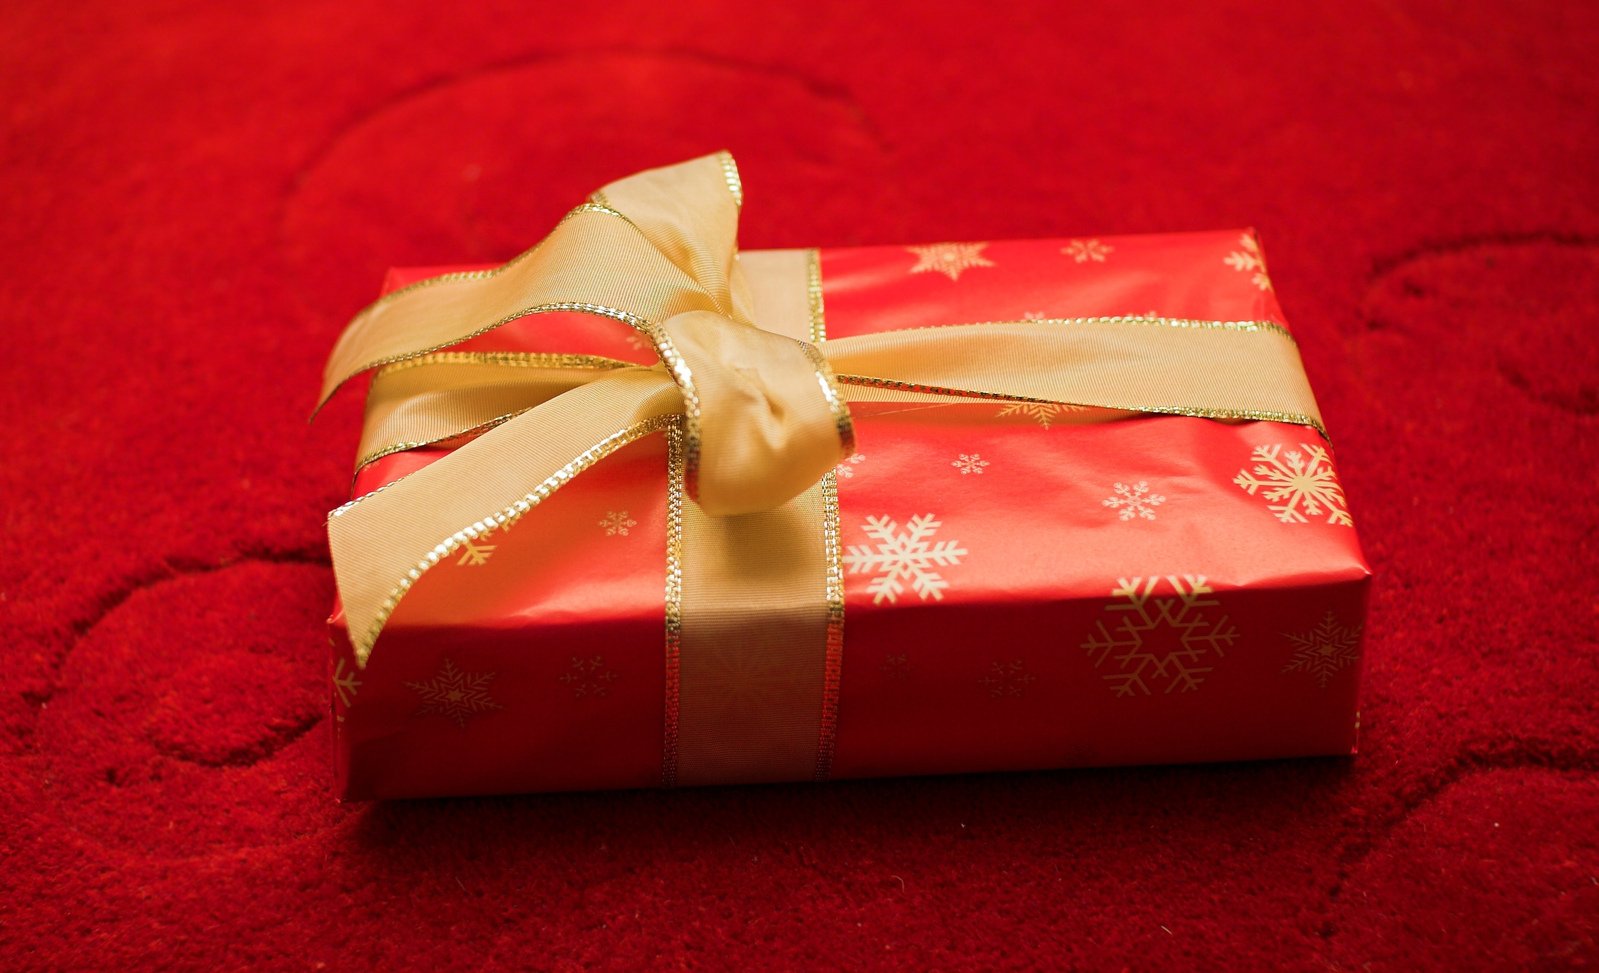 a gift wrapped in paper is on a red table